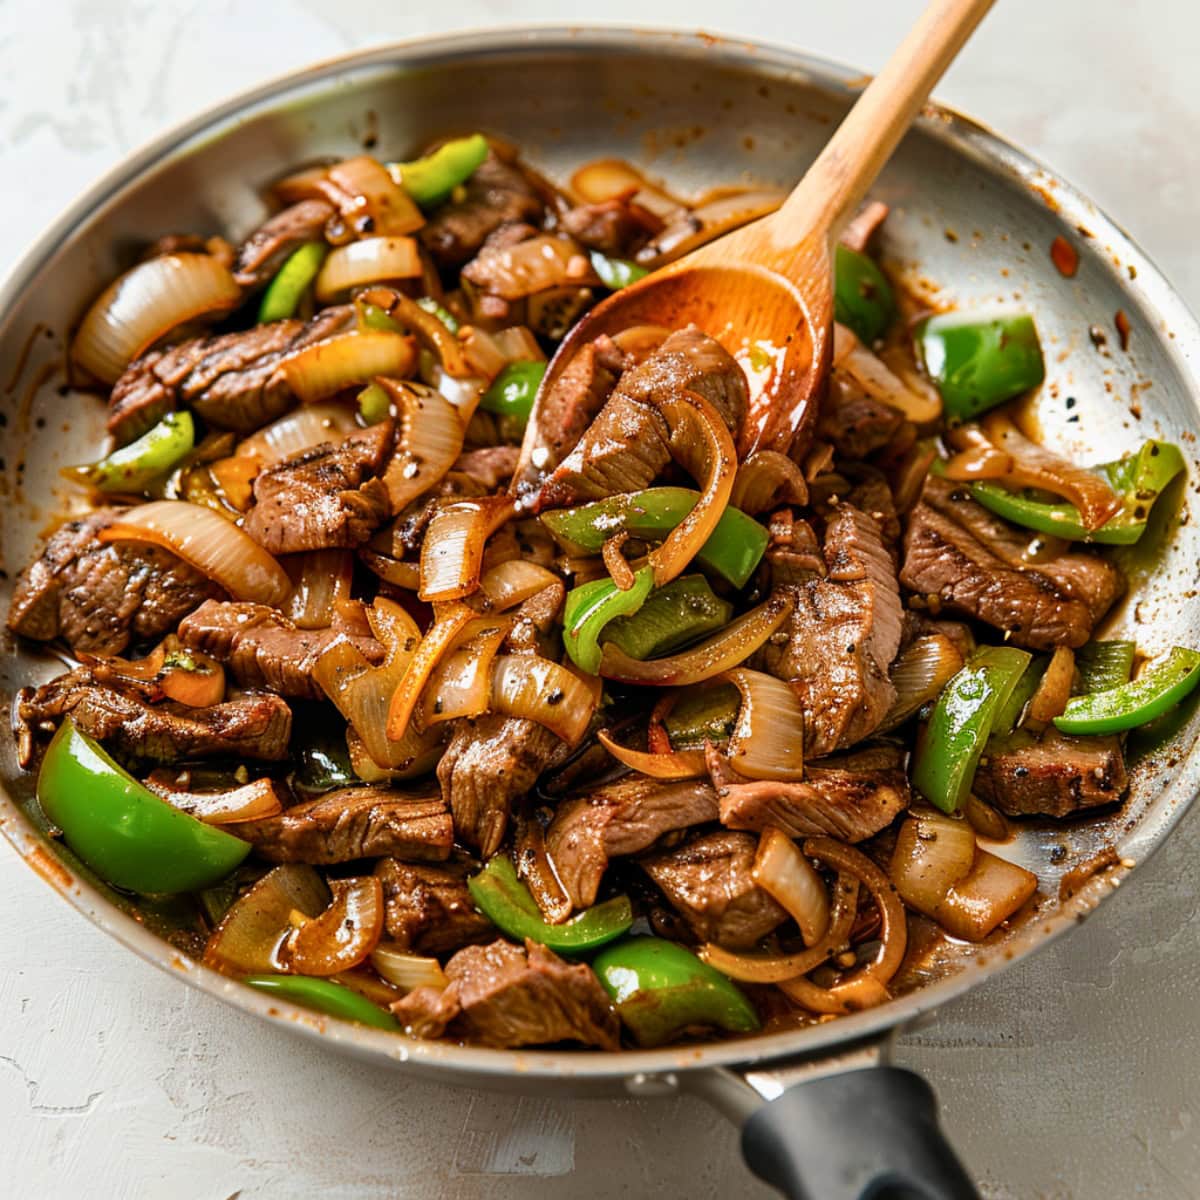 Sauteed onion, bell pepper and steak in a pan.